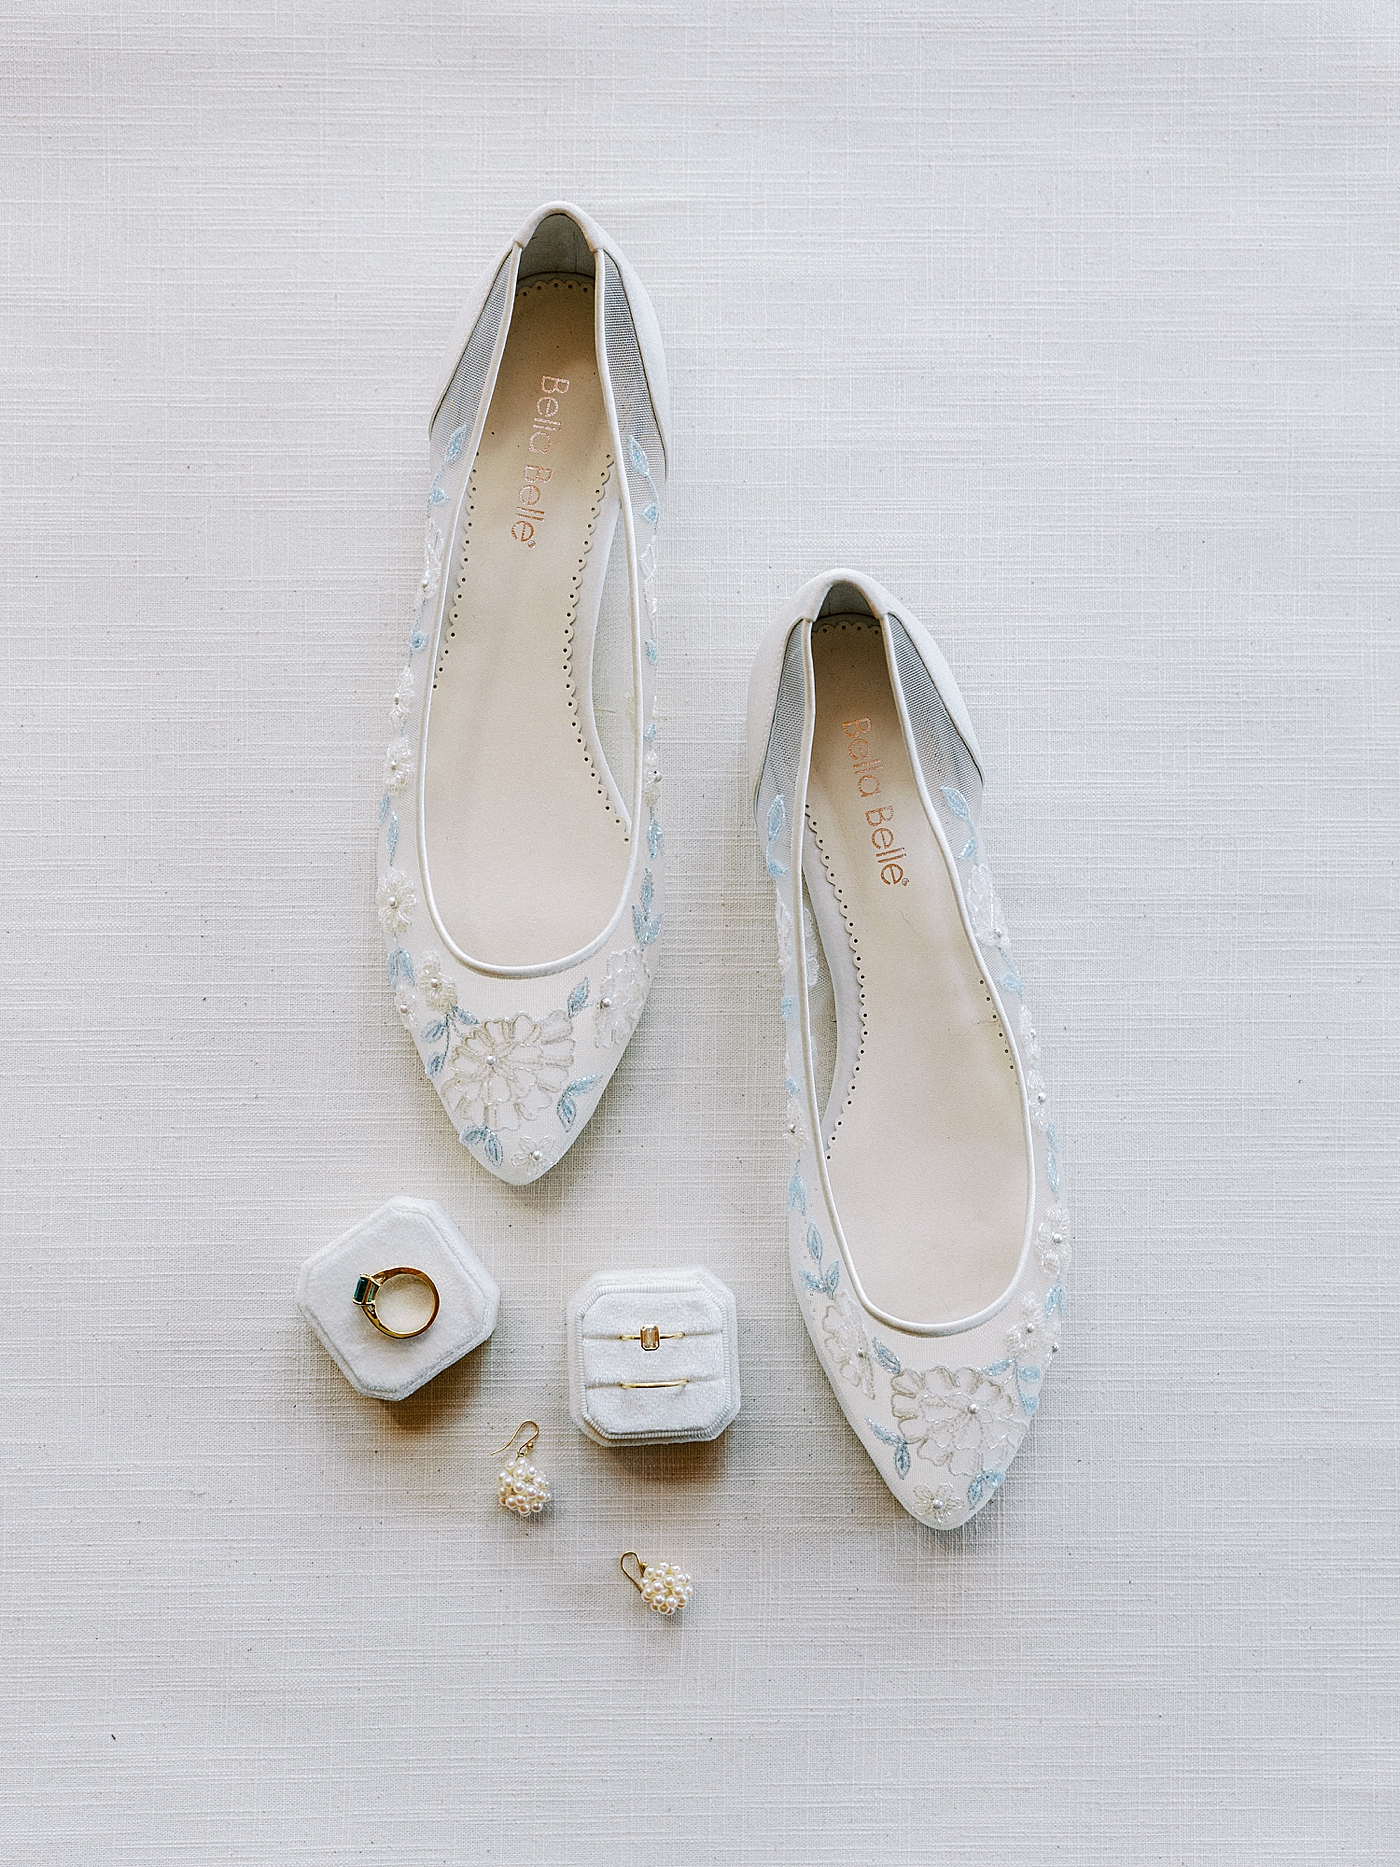 Bella Belle bridal shoes | Photo by Diane Sotero Photography